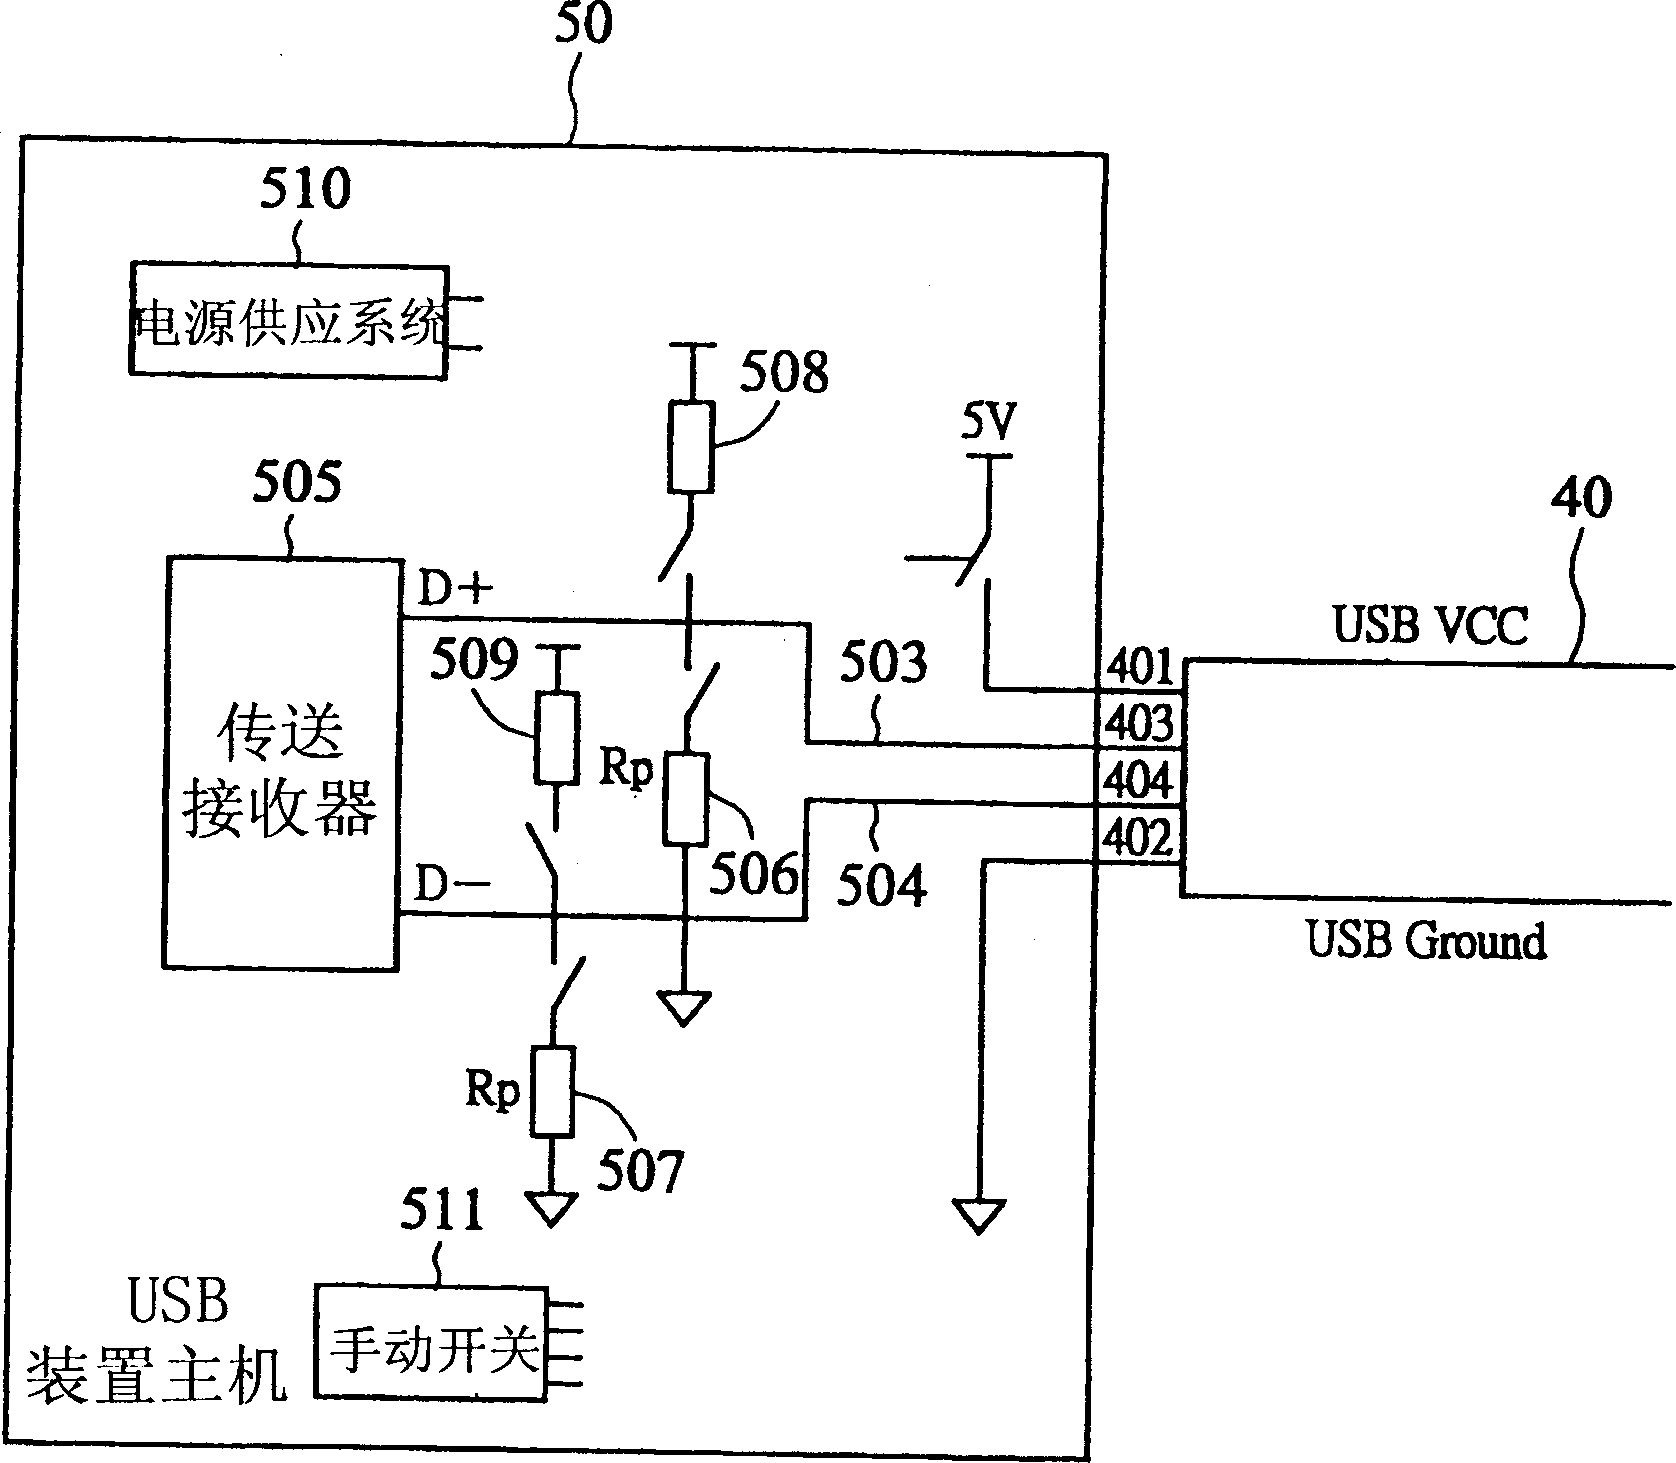 Universal serial bus (USB) connection detecting circuit system and its operation method